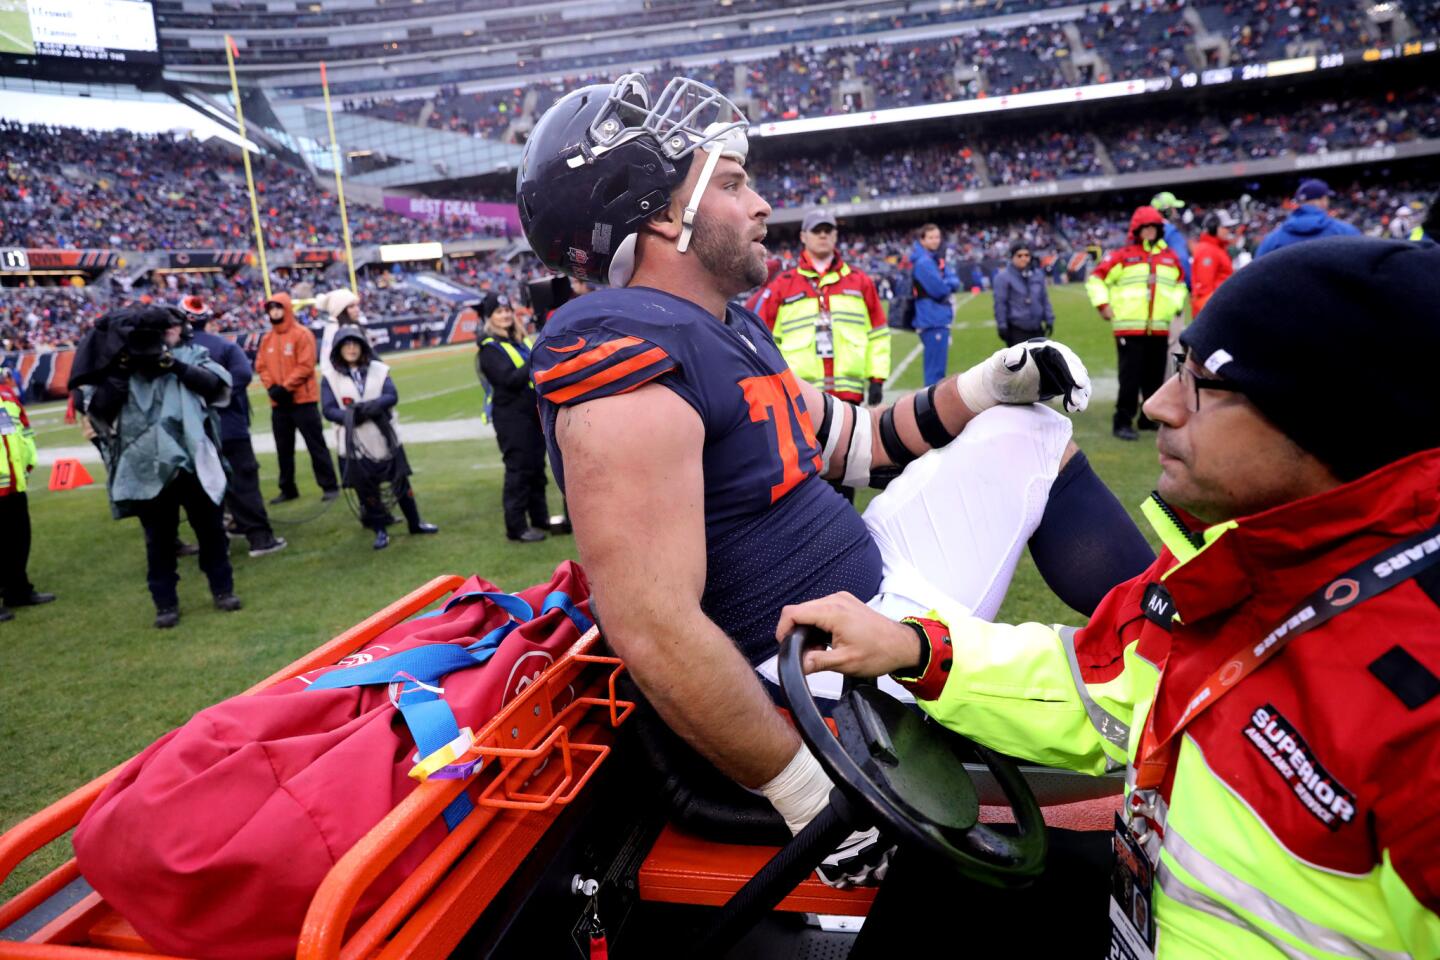 Bears offensive guard Kyle Long is carted off the field after suffering an injury in the fourth quarter against the Jets at Soldier Field on Sunday, Oct. 28, 2018.